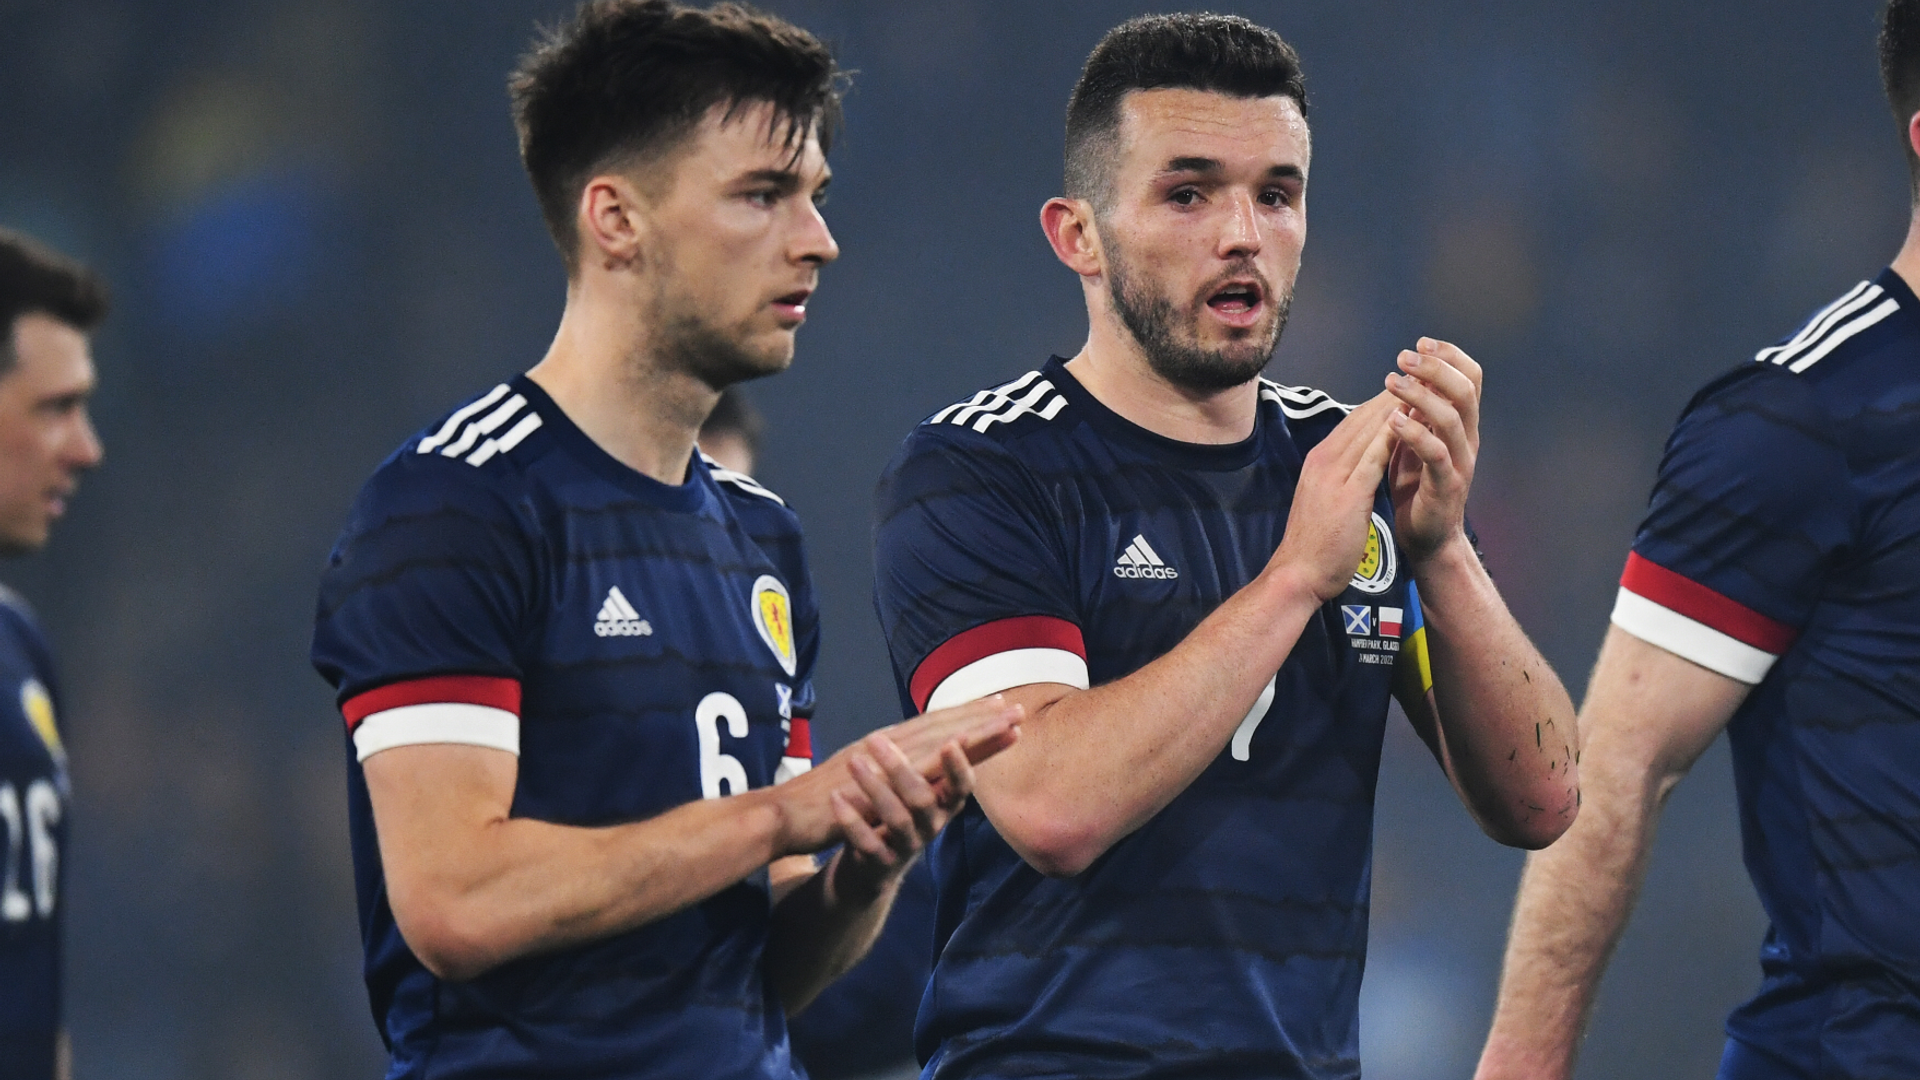 Scotland denied victory by late Poland penalty